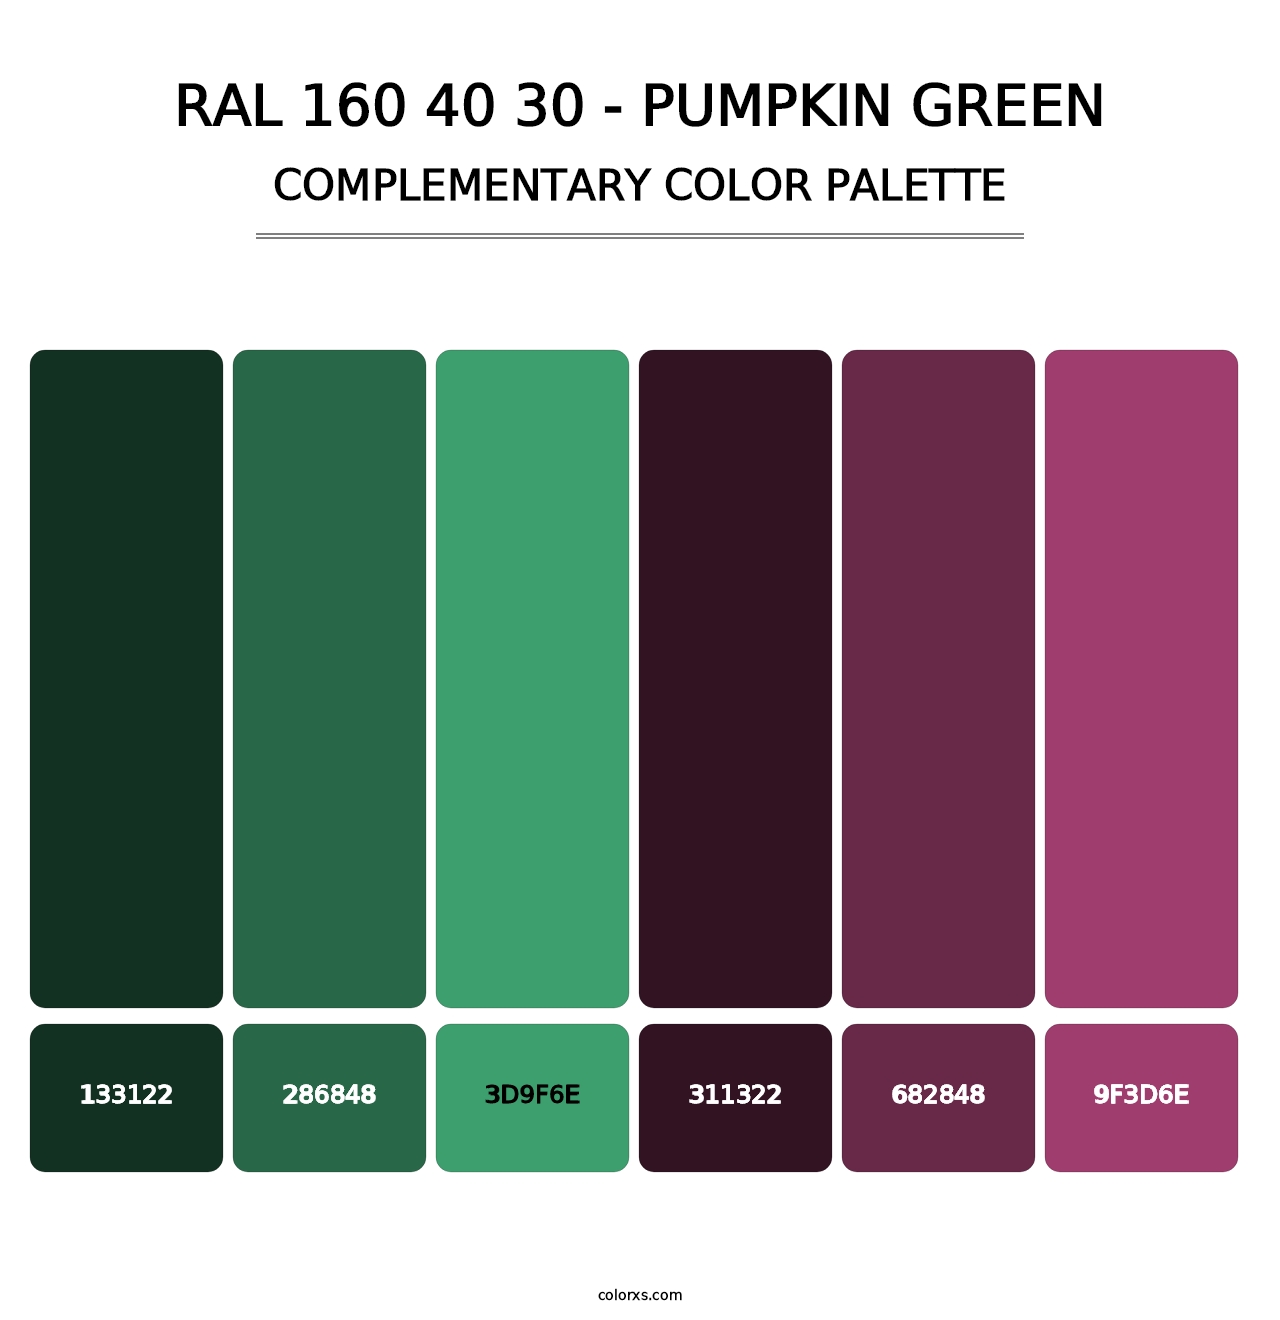 RAL 160 40 30 - Pumpkin Green - Complementary Color Palette